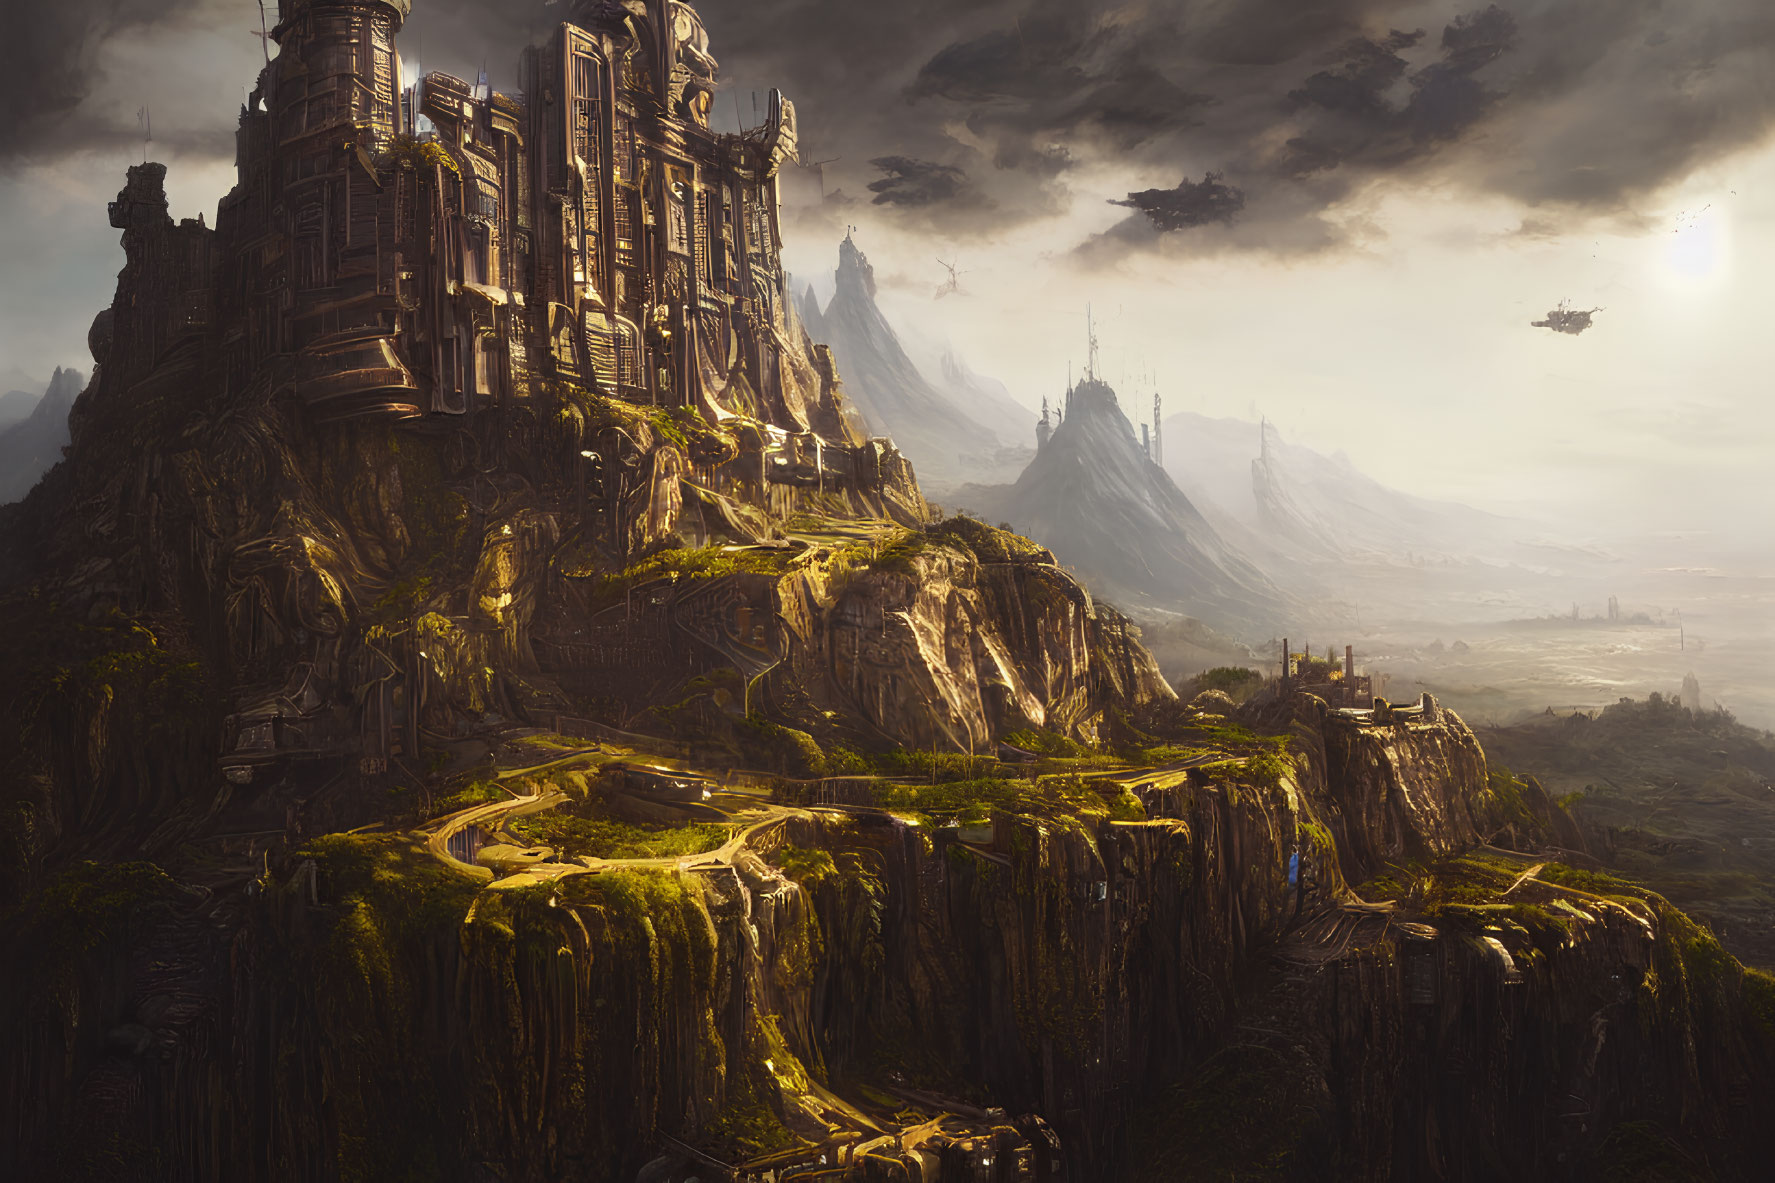 Majestic fantasy mountain castle with spires and towers in a vast landscape.